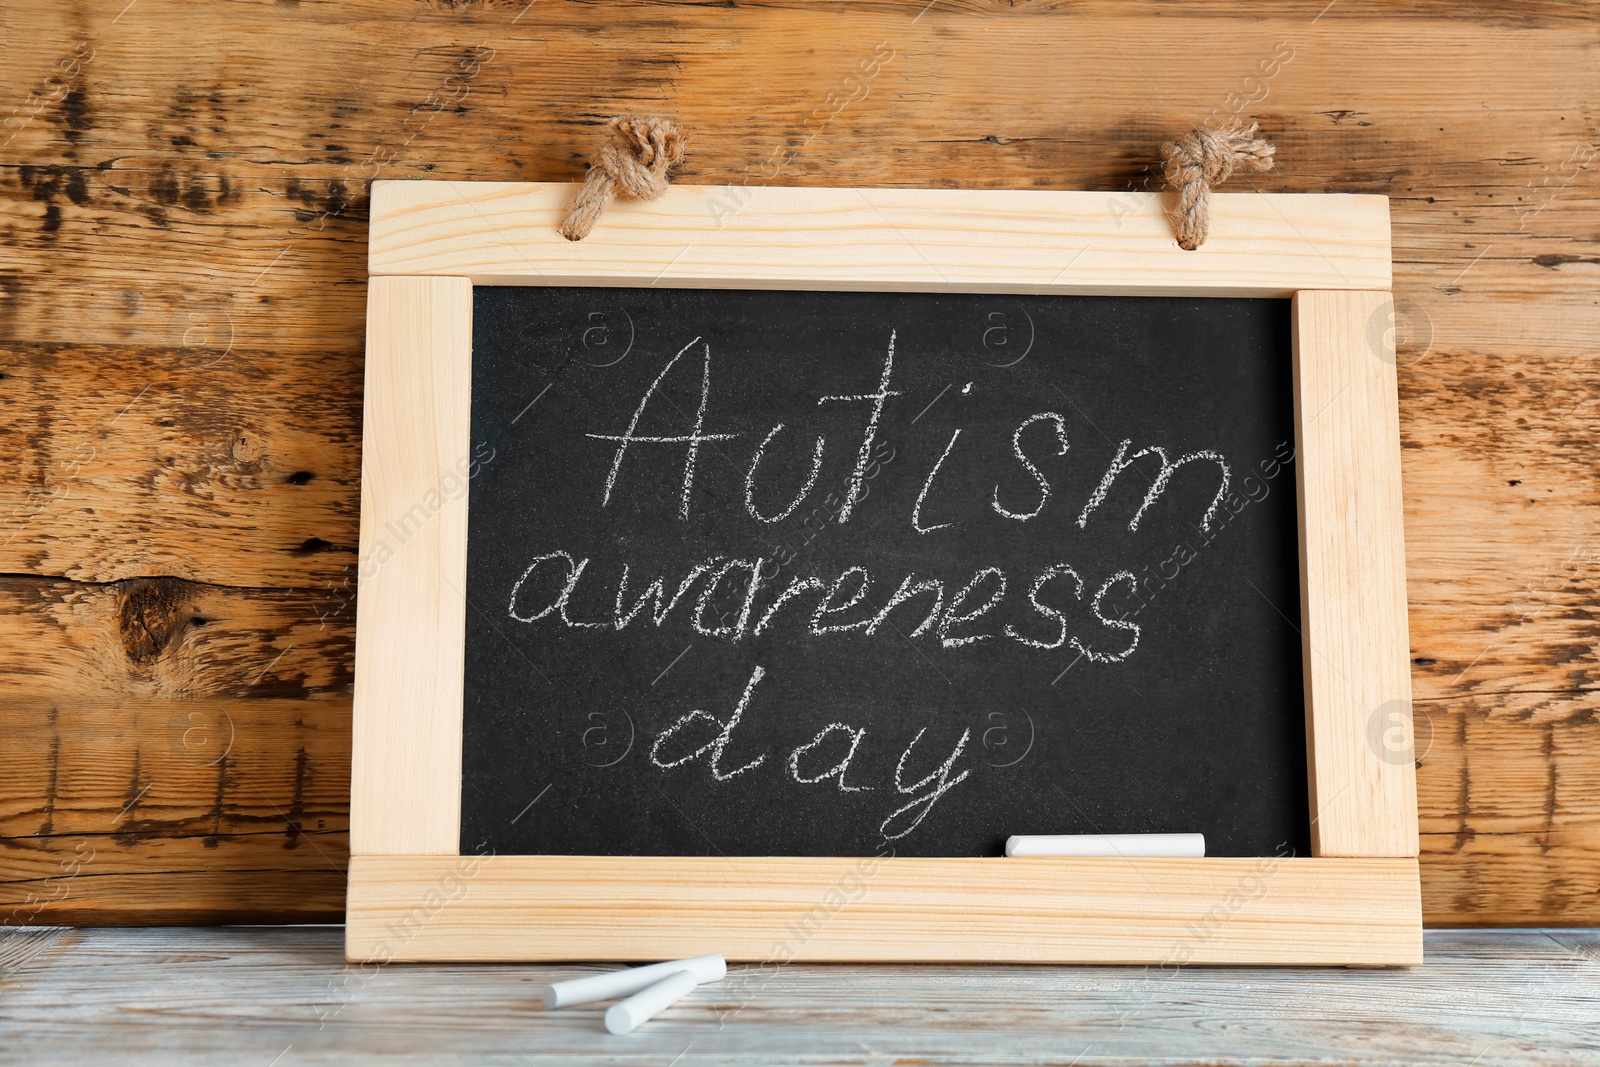 Photo of Chalkboard with phrase "Autism awareness day" on table